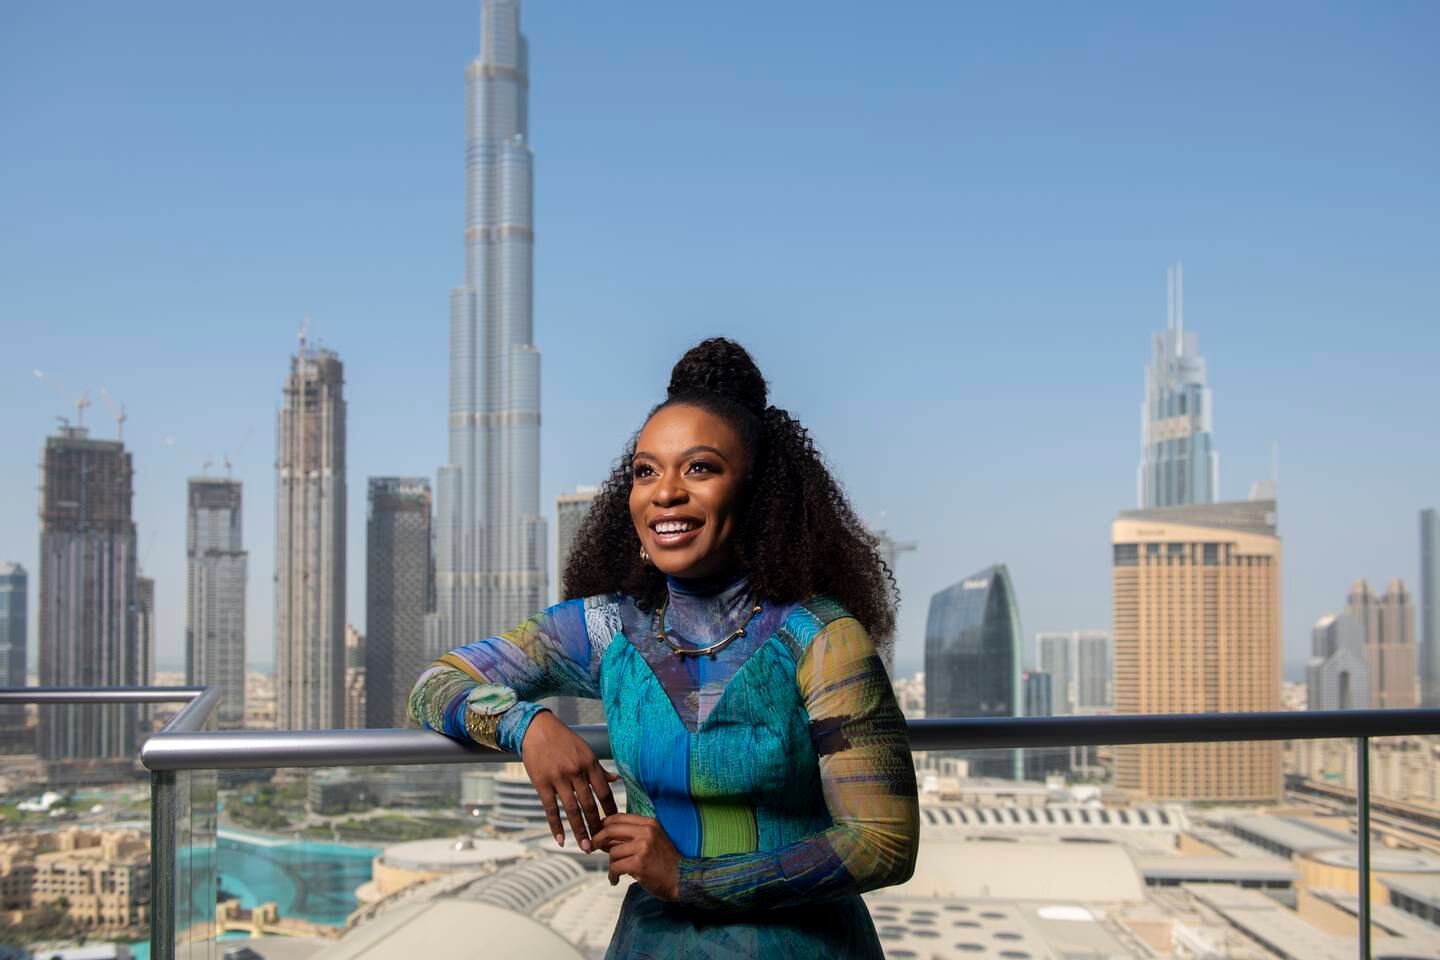 South African actress Nomzamo Mbatha in Dubai for Expo 2020, October 18, 2021. Issa AlKindy / The National